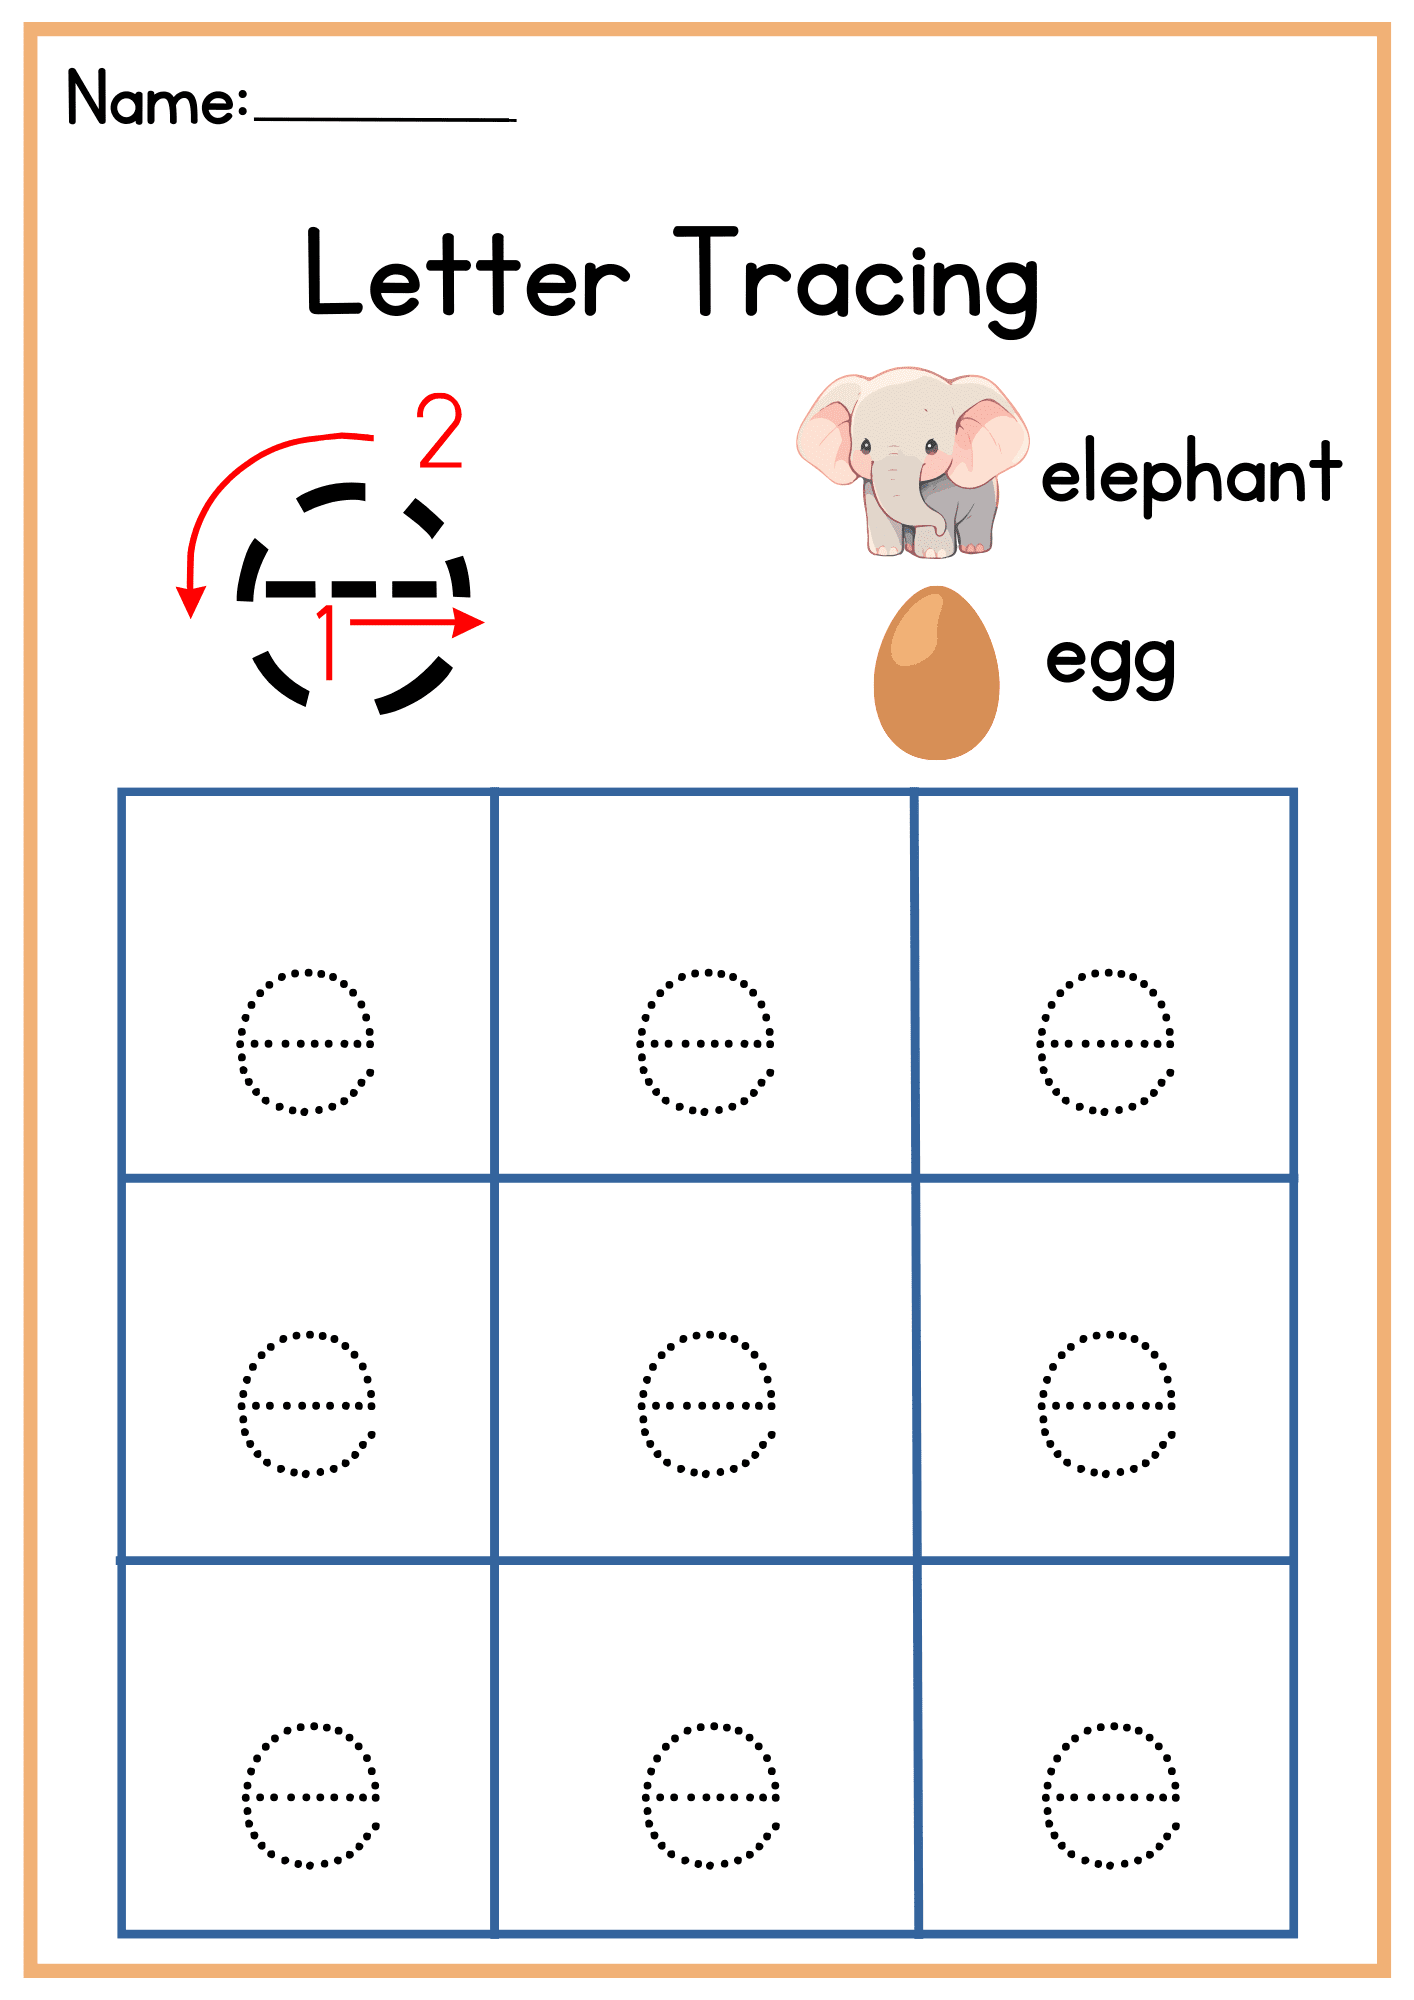 e Letter Tracing Worksheets. Trace the Small Word e.